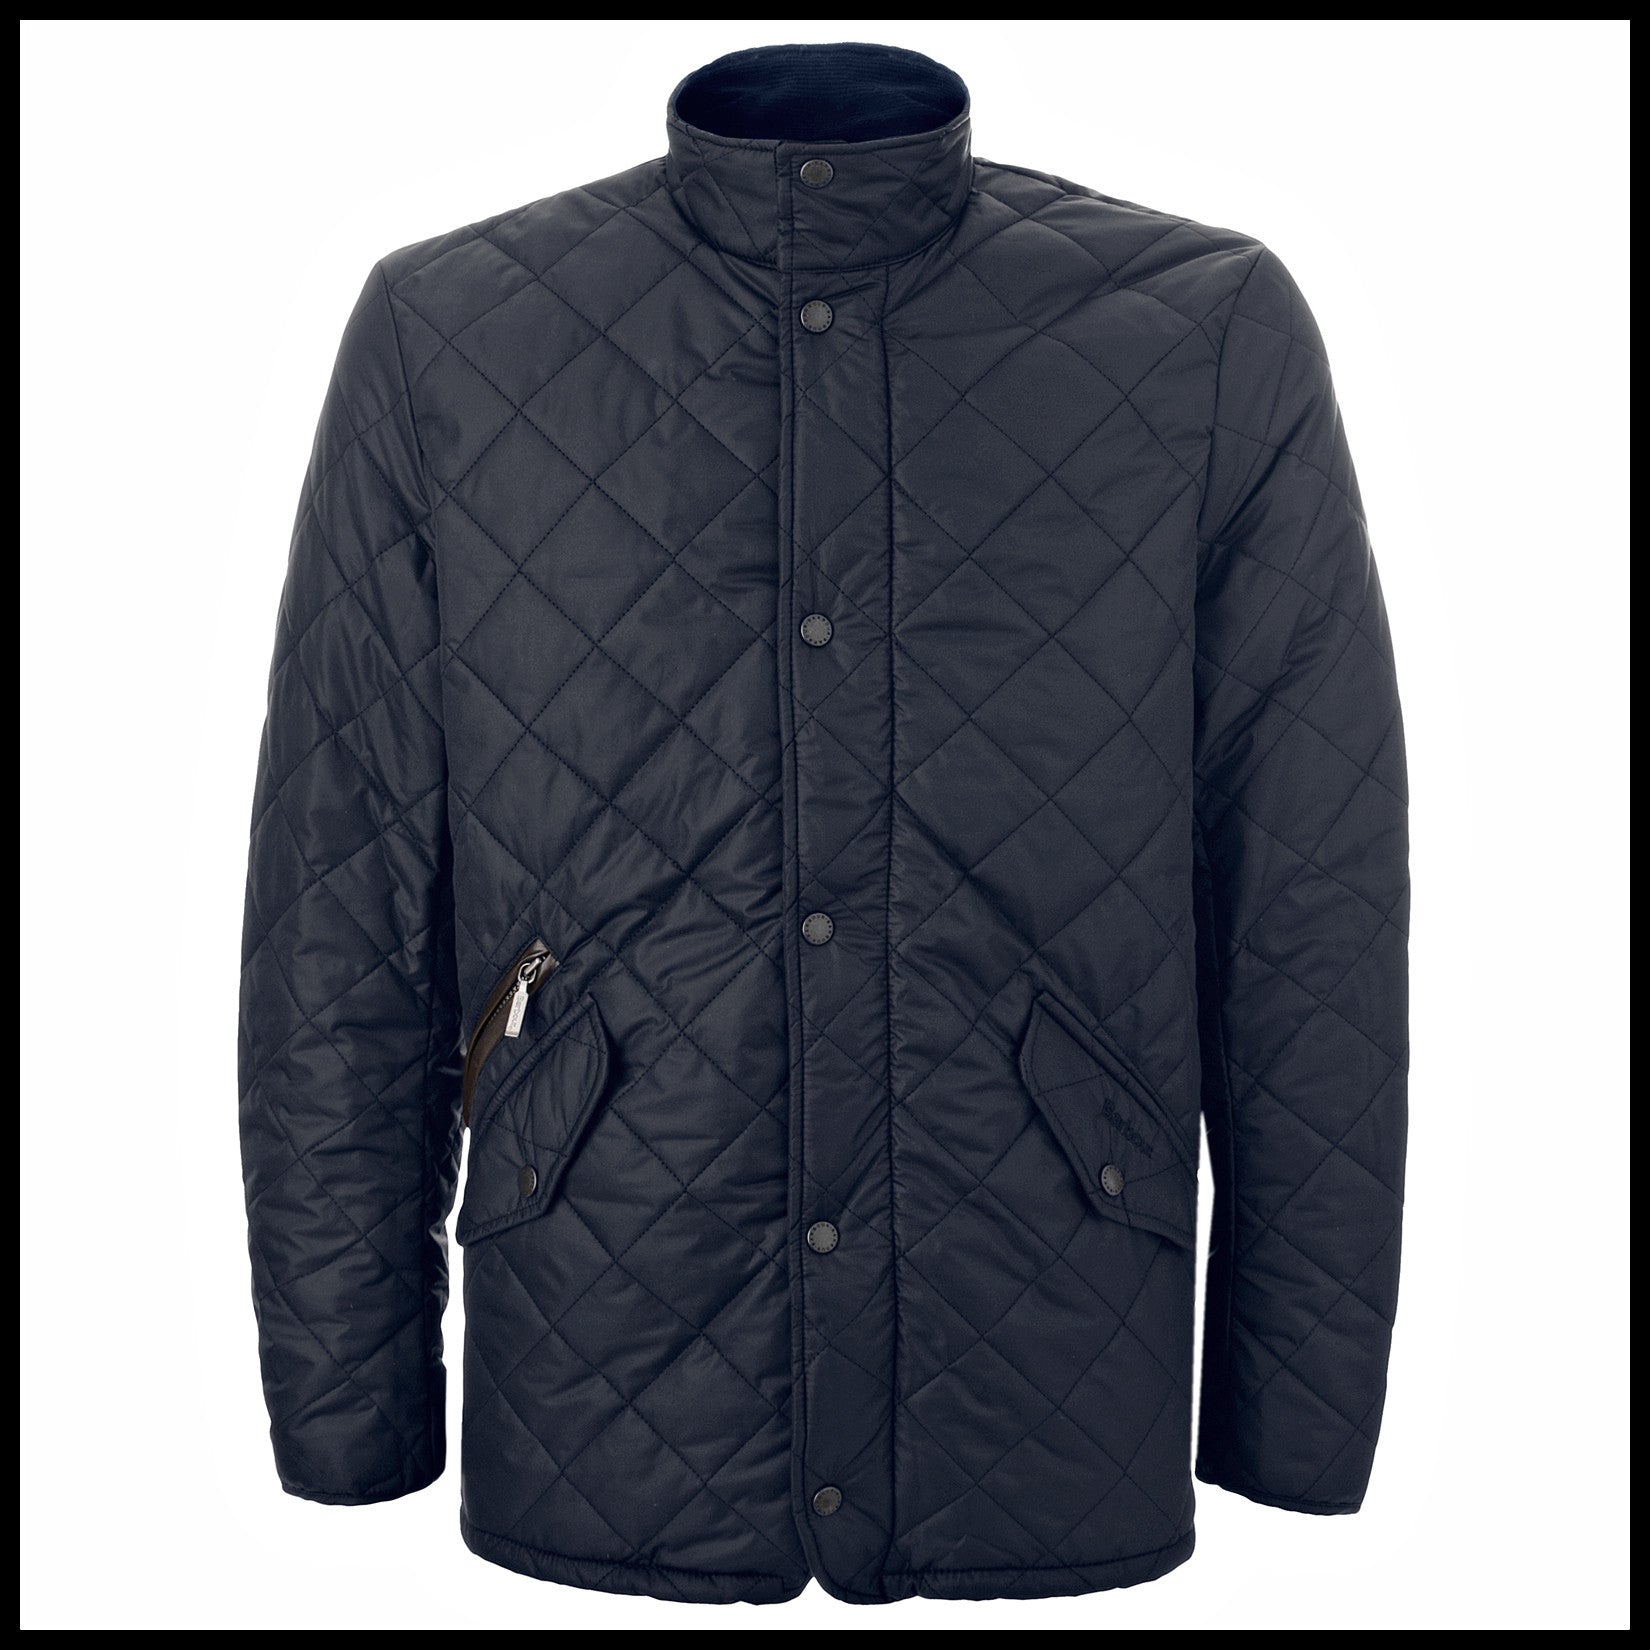 Smyths Country Sports Barbour Jackets